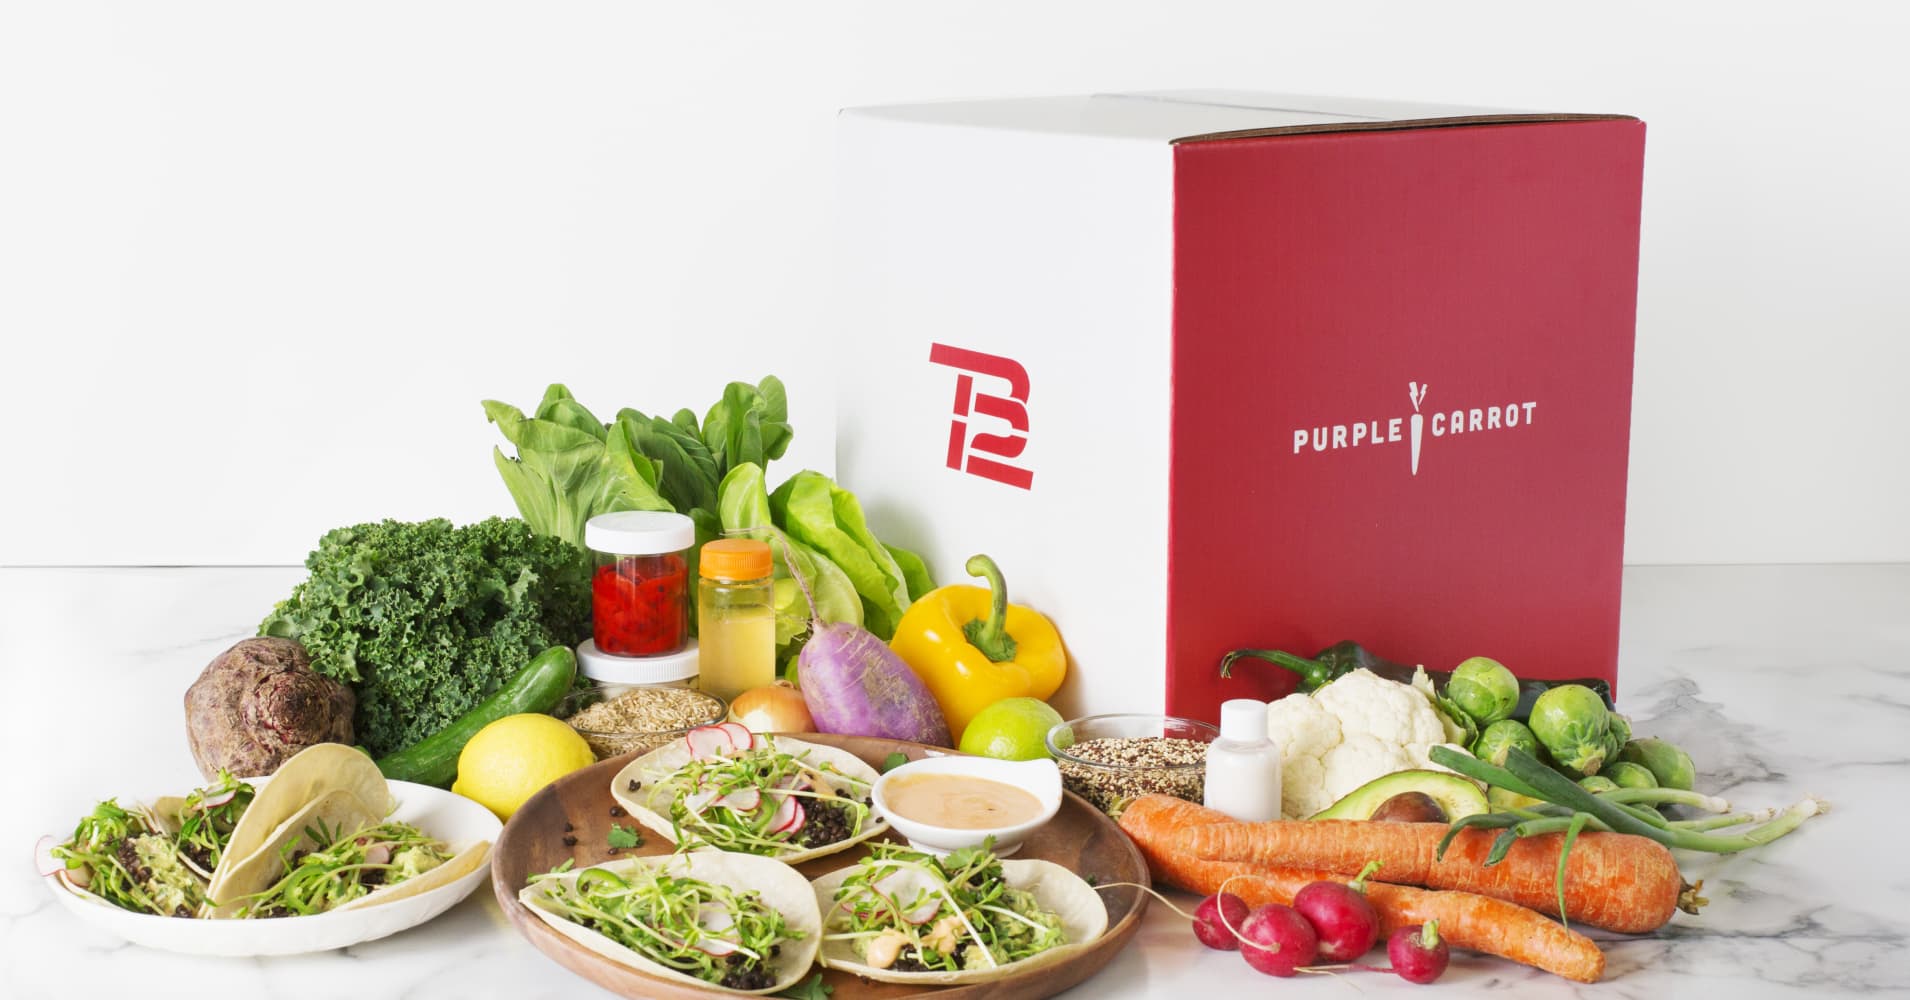 Tom Brady's $78 meal kit is all about eating your vegetables